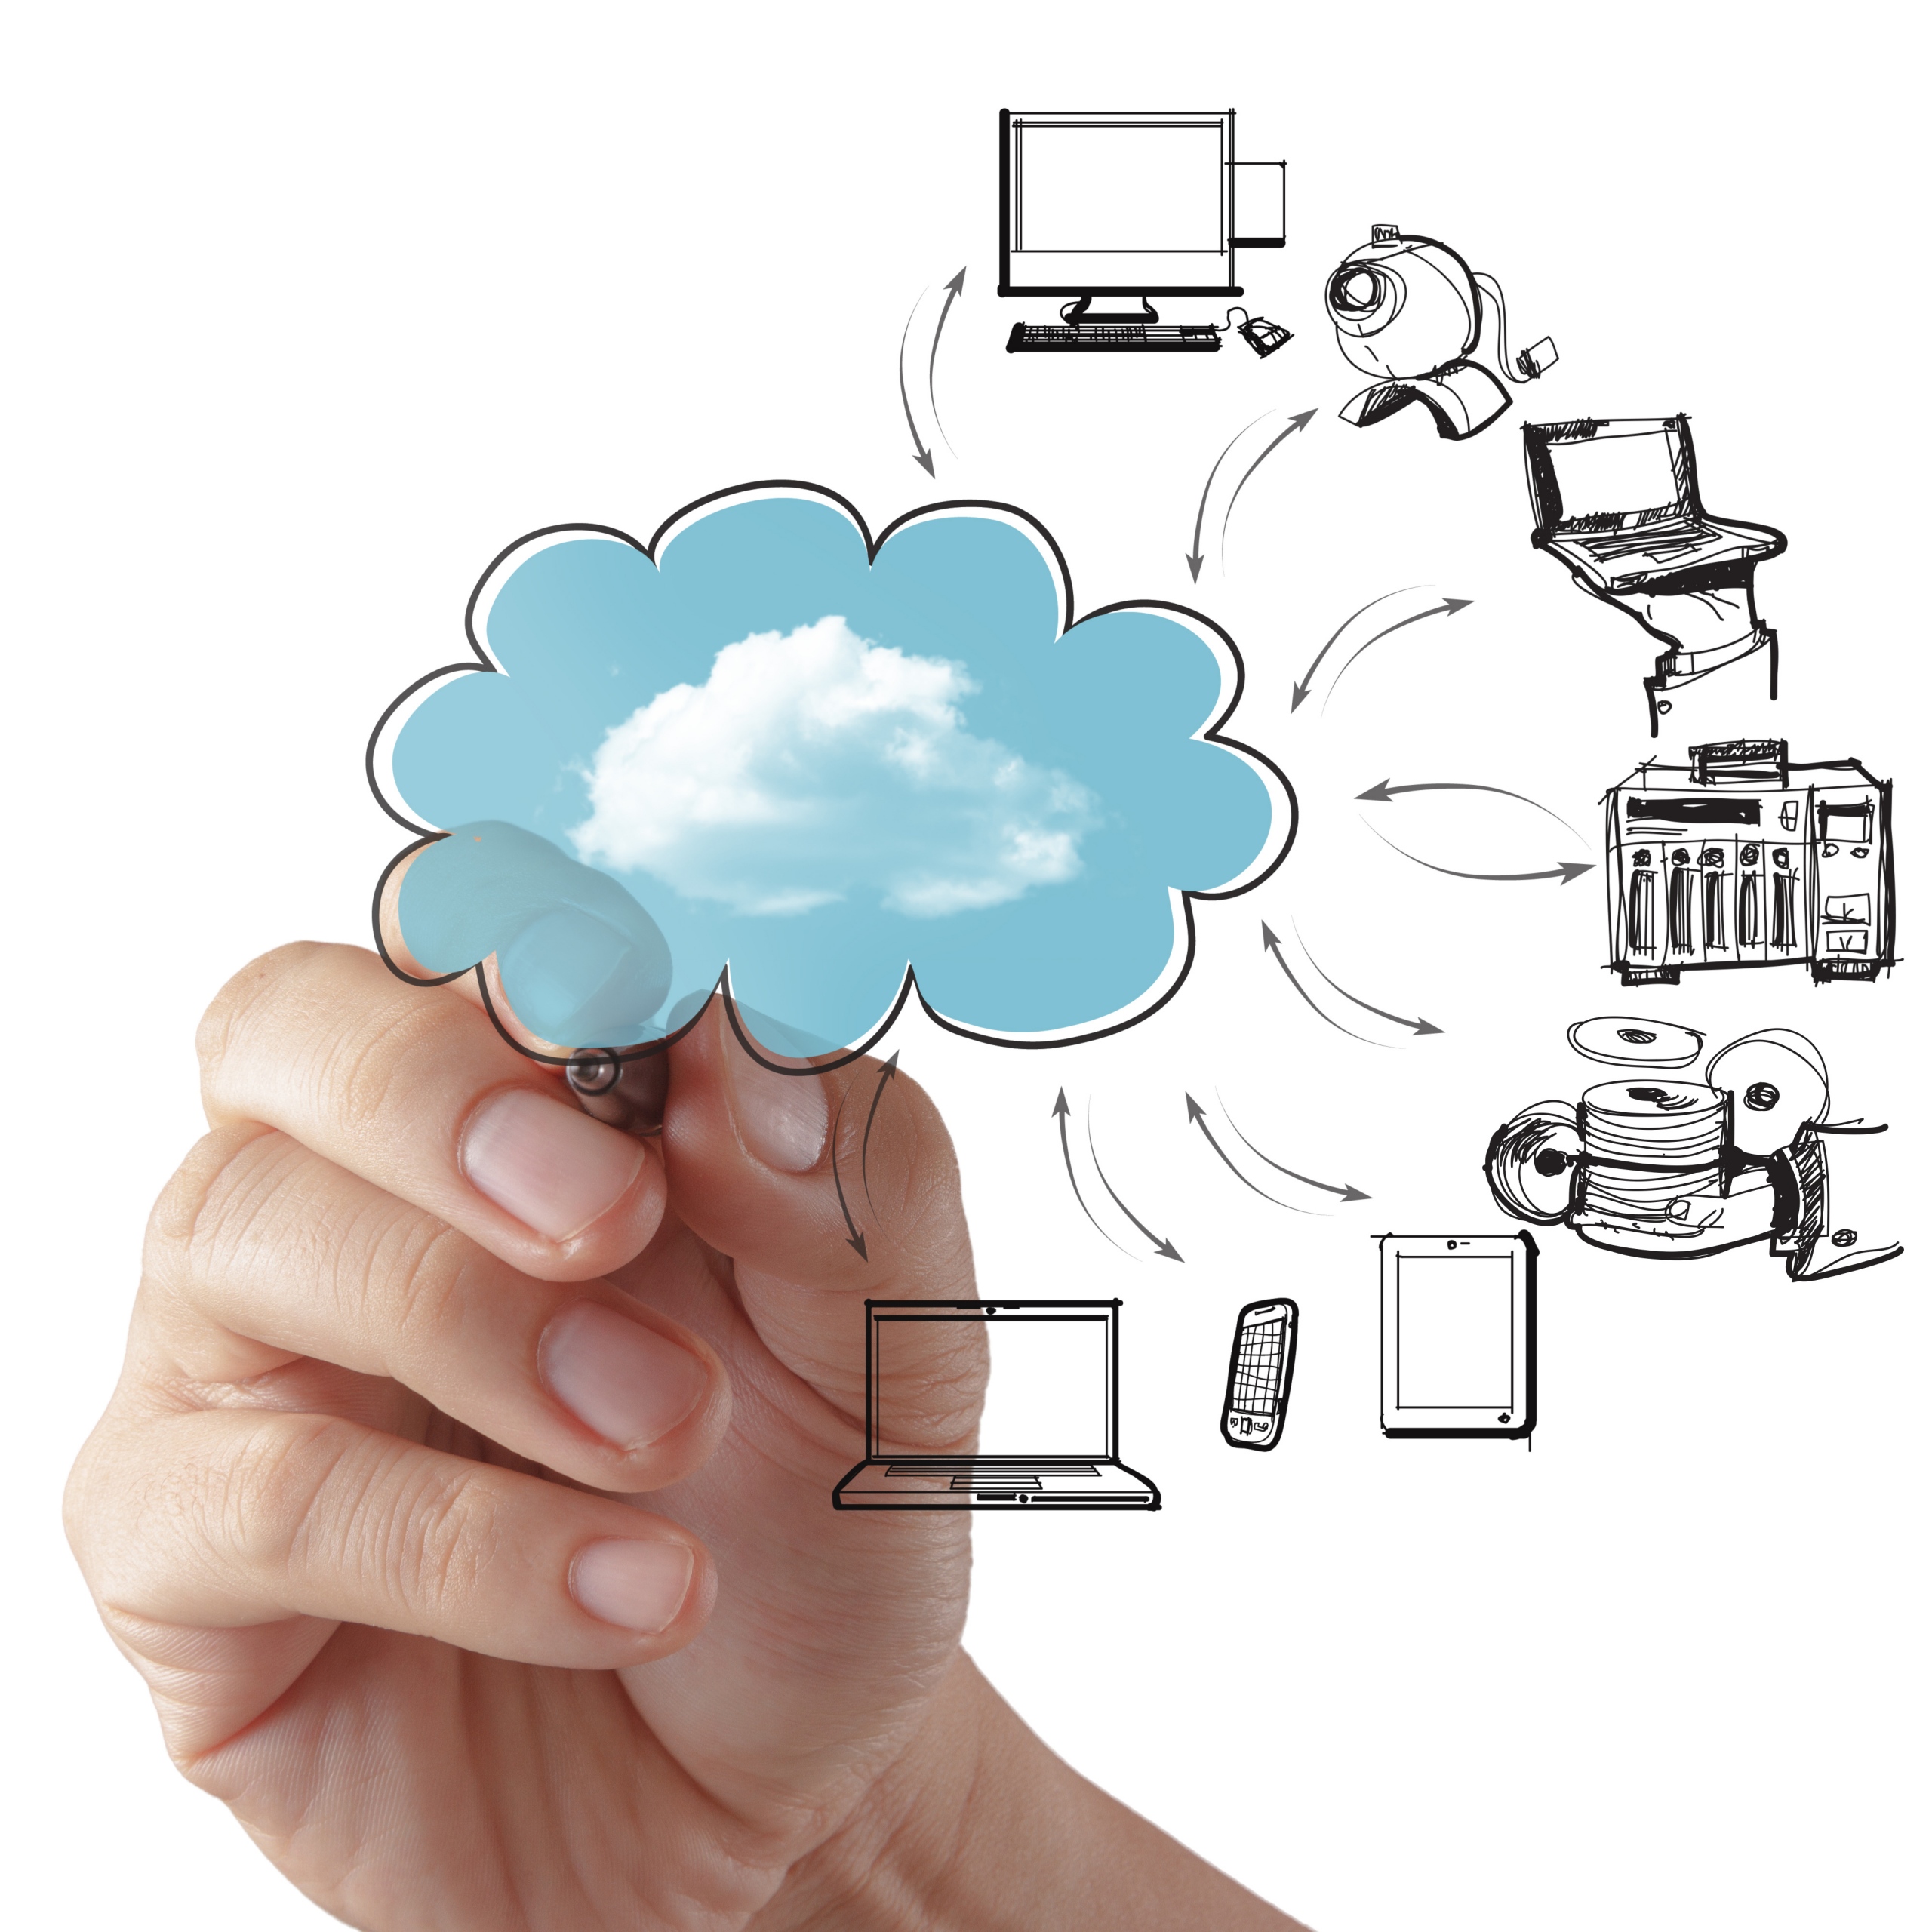 Cloud Computing – Time To Become A Reseller To Capitalise On This Rapidly Growing Industry